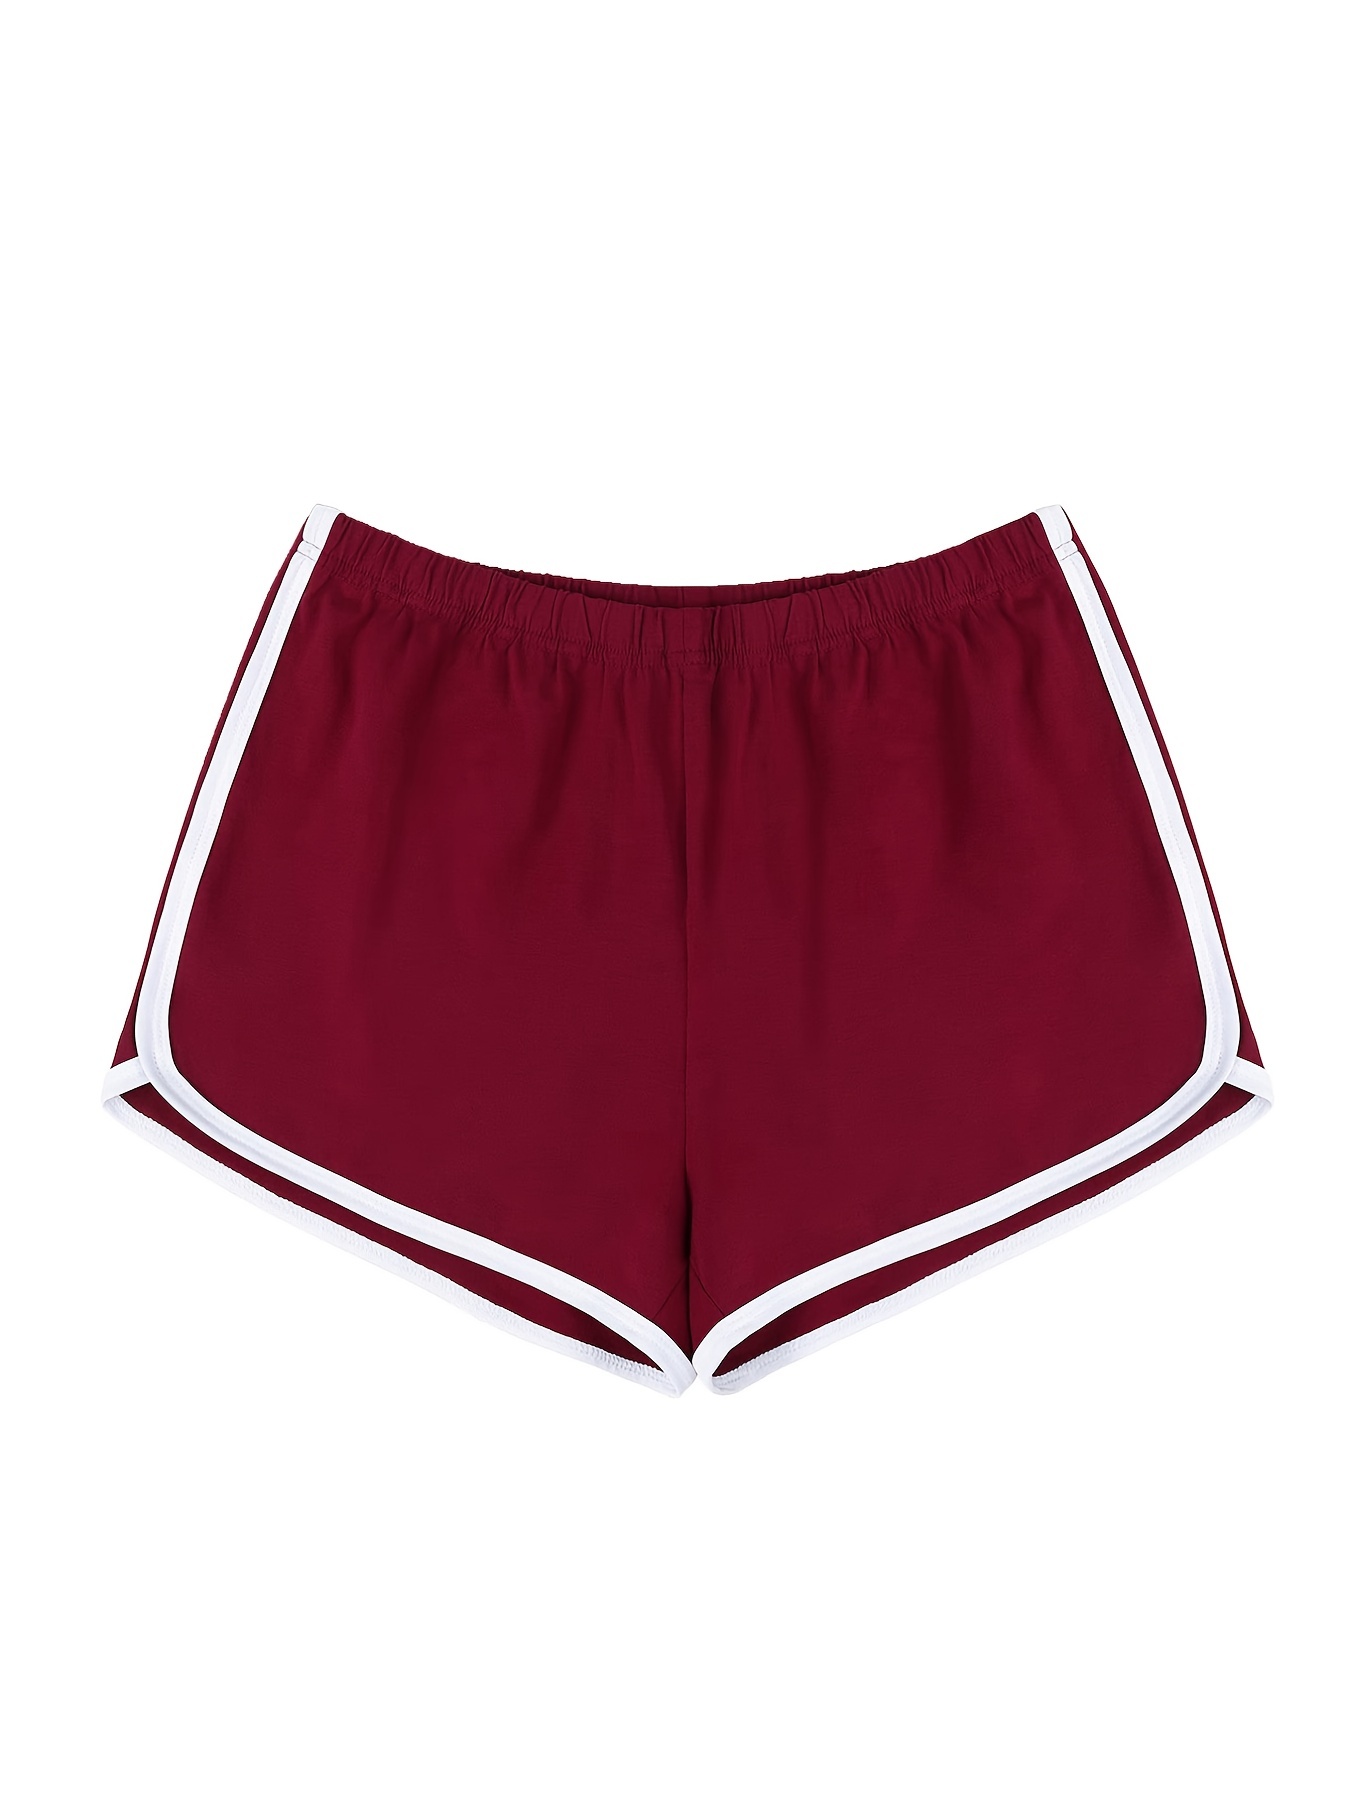 V3 Apparel Womens Tempo Seamless Scrunch Workout Shorts - Burgundy Red -  Gym, Running, Yoga Tights